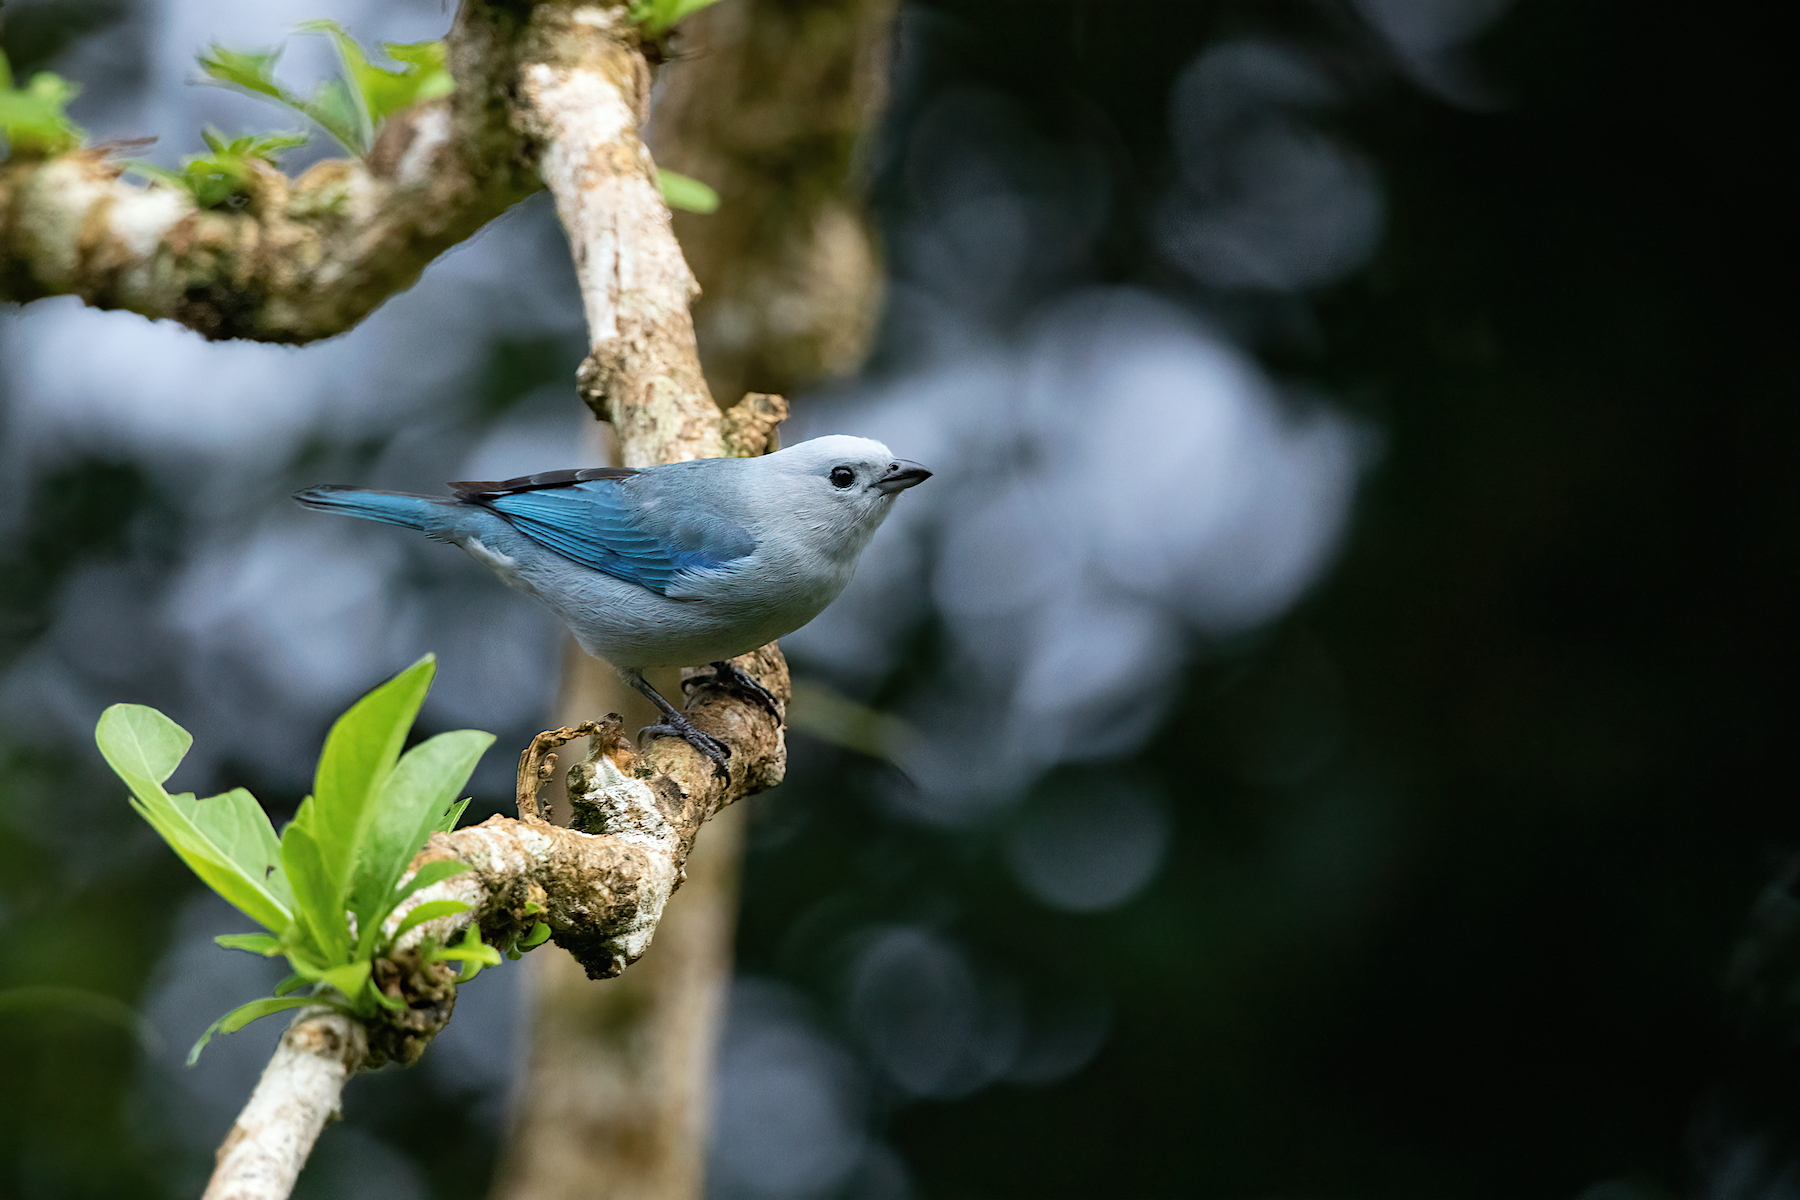 Although a common bird, the Blue Grey Tanager can look great in the right photographic moment